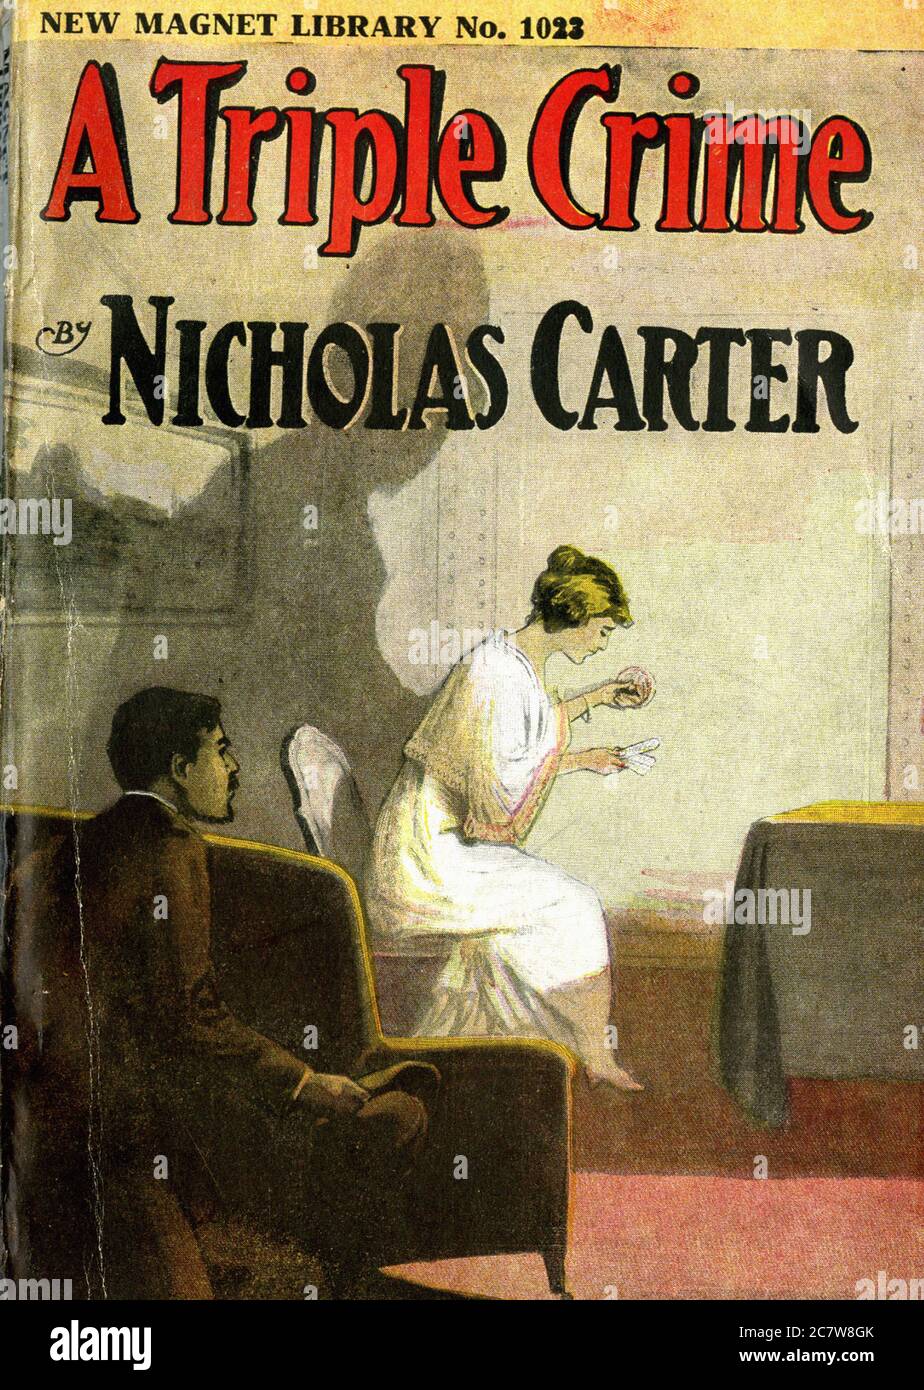 Nicholas Carter - A Triple Crime - New Magnet Library - Vintage Pulp Literary Stock Photo